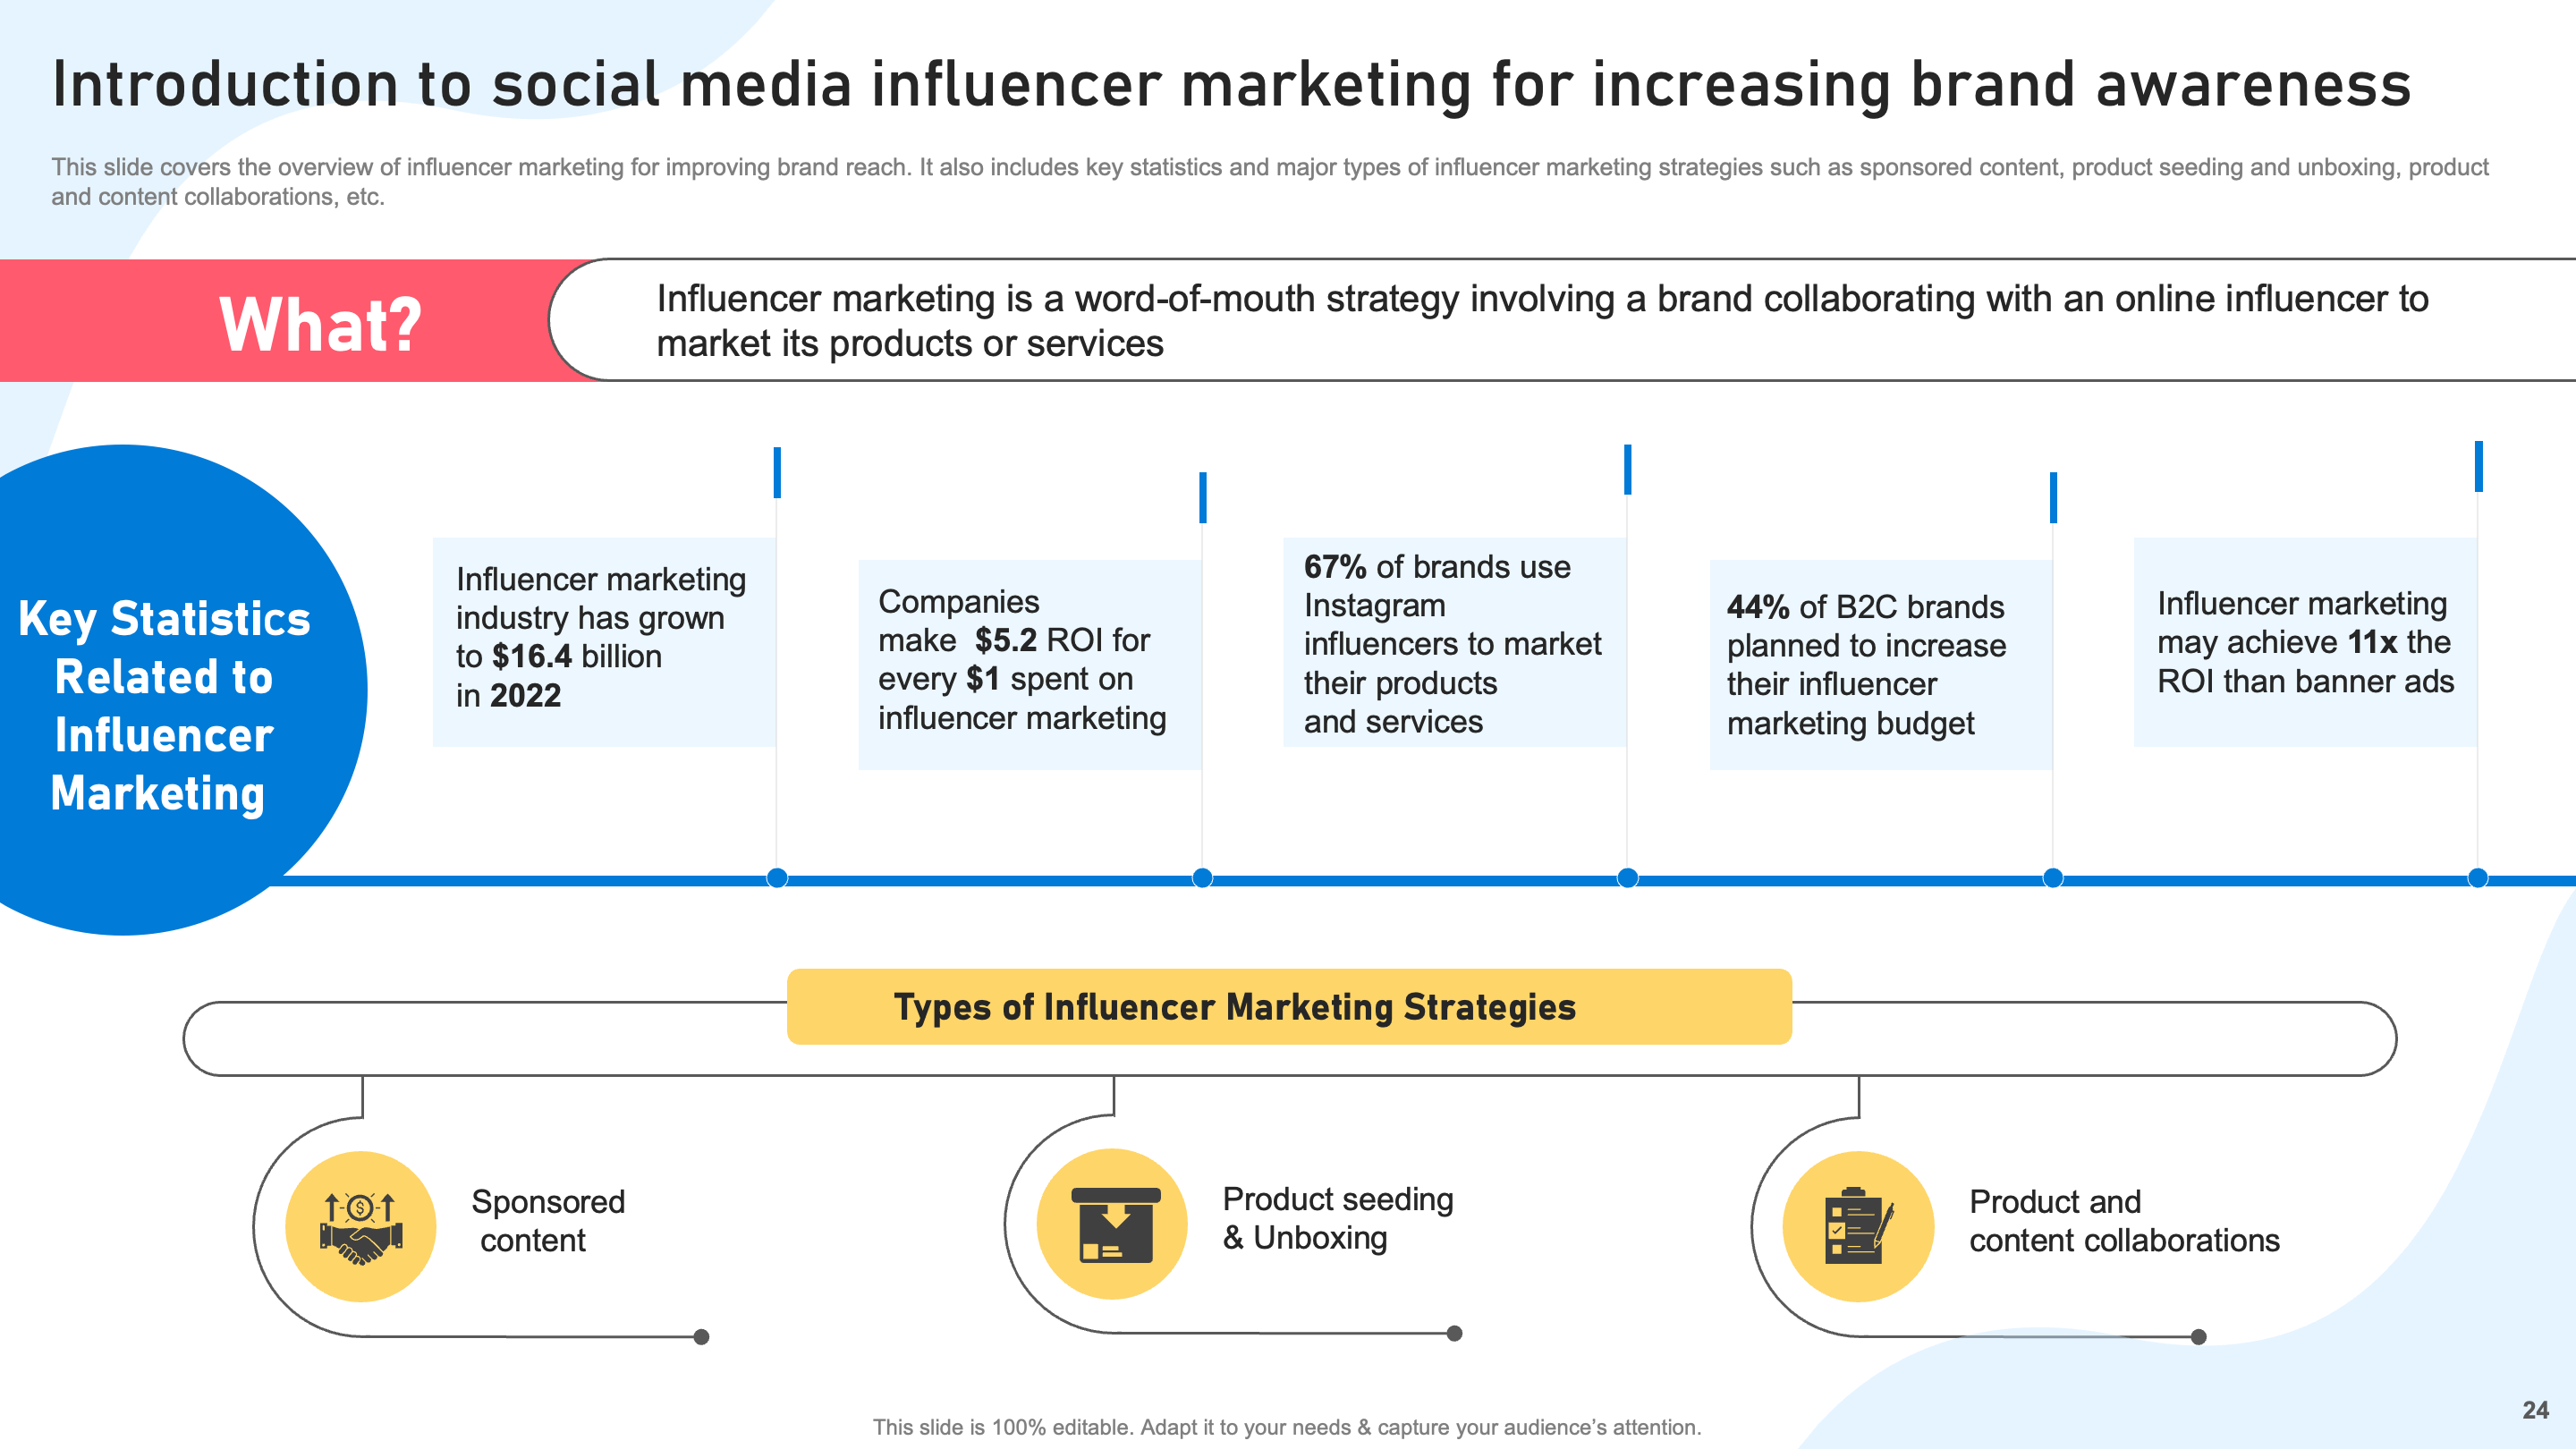 Introduction to Social Media Influencer Marketing